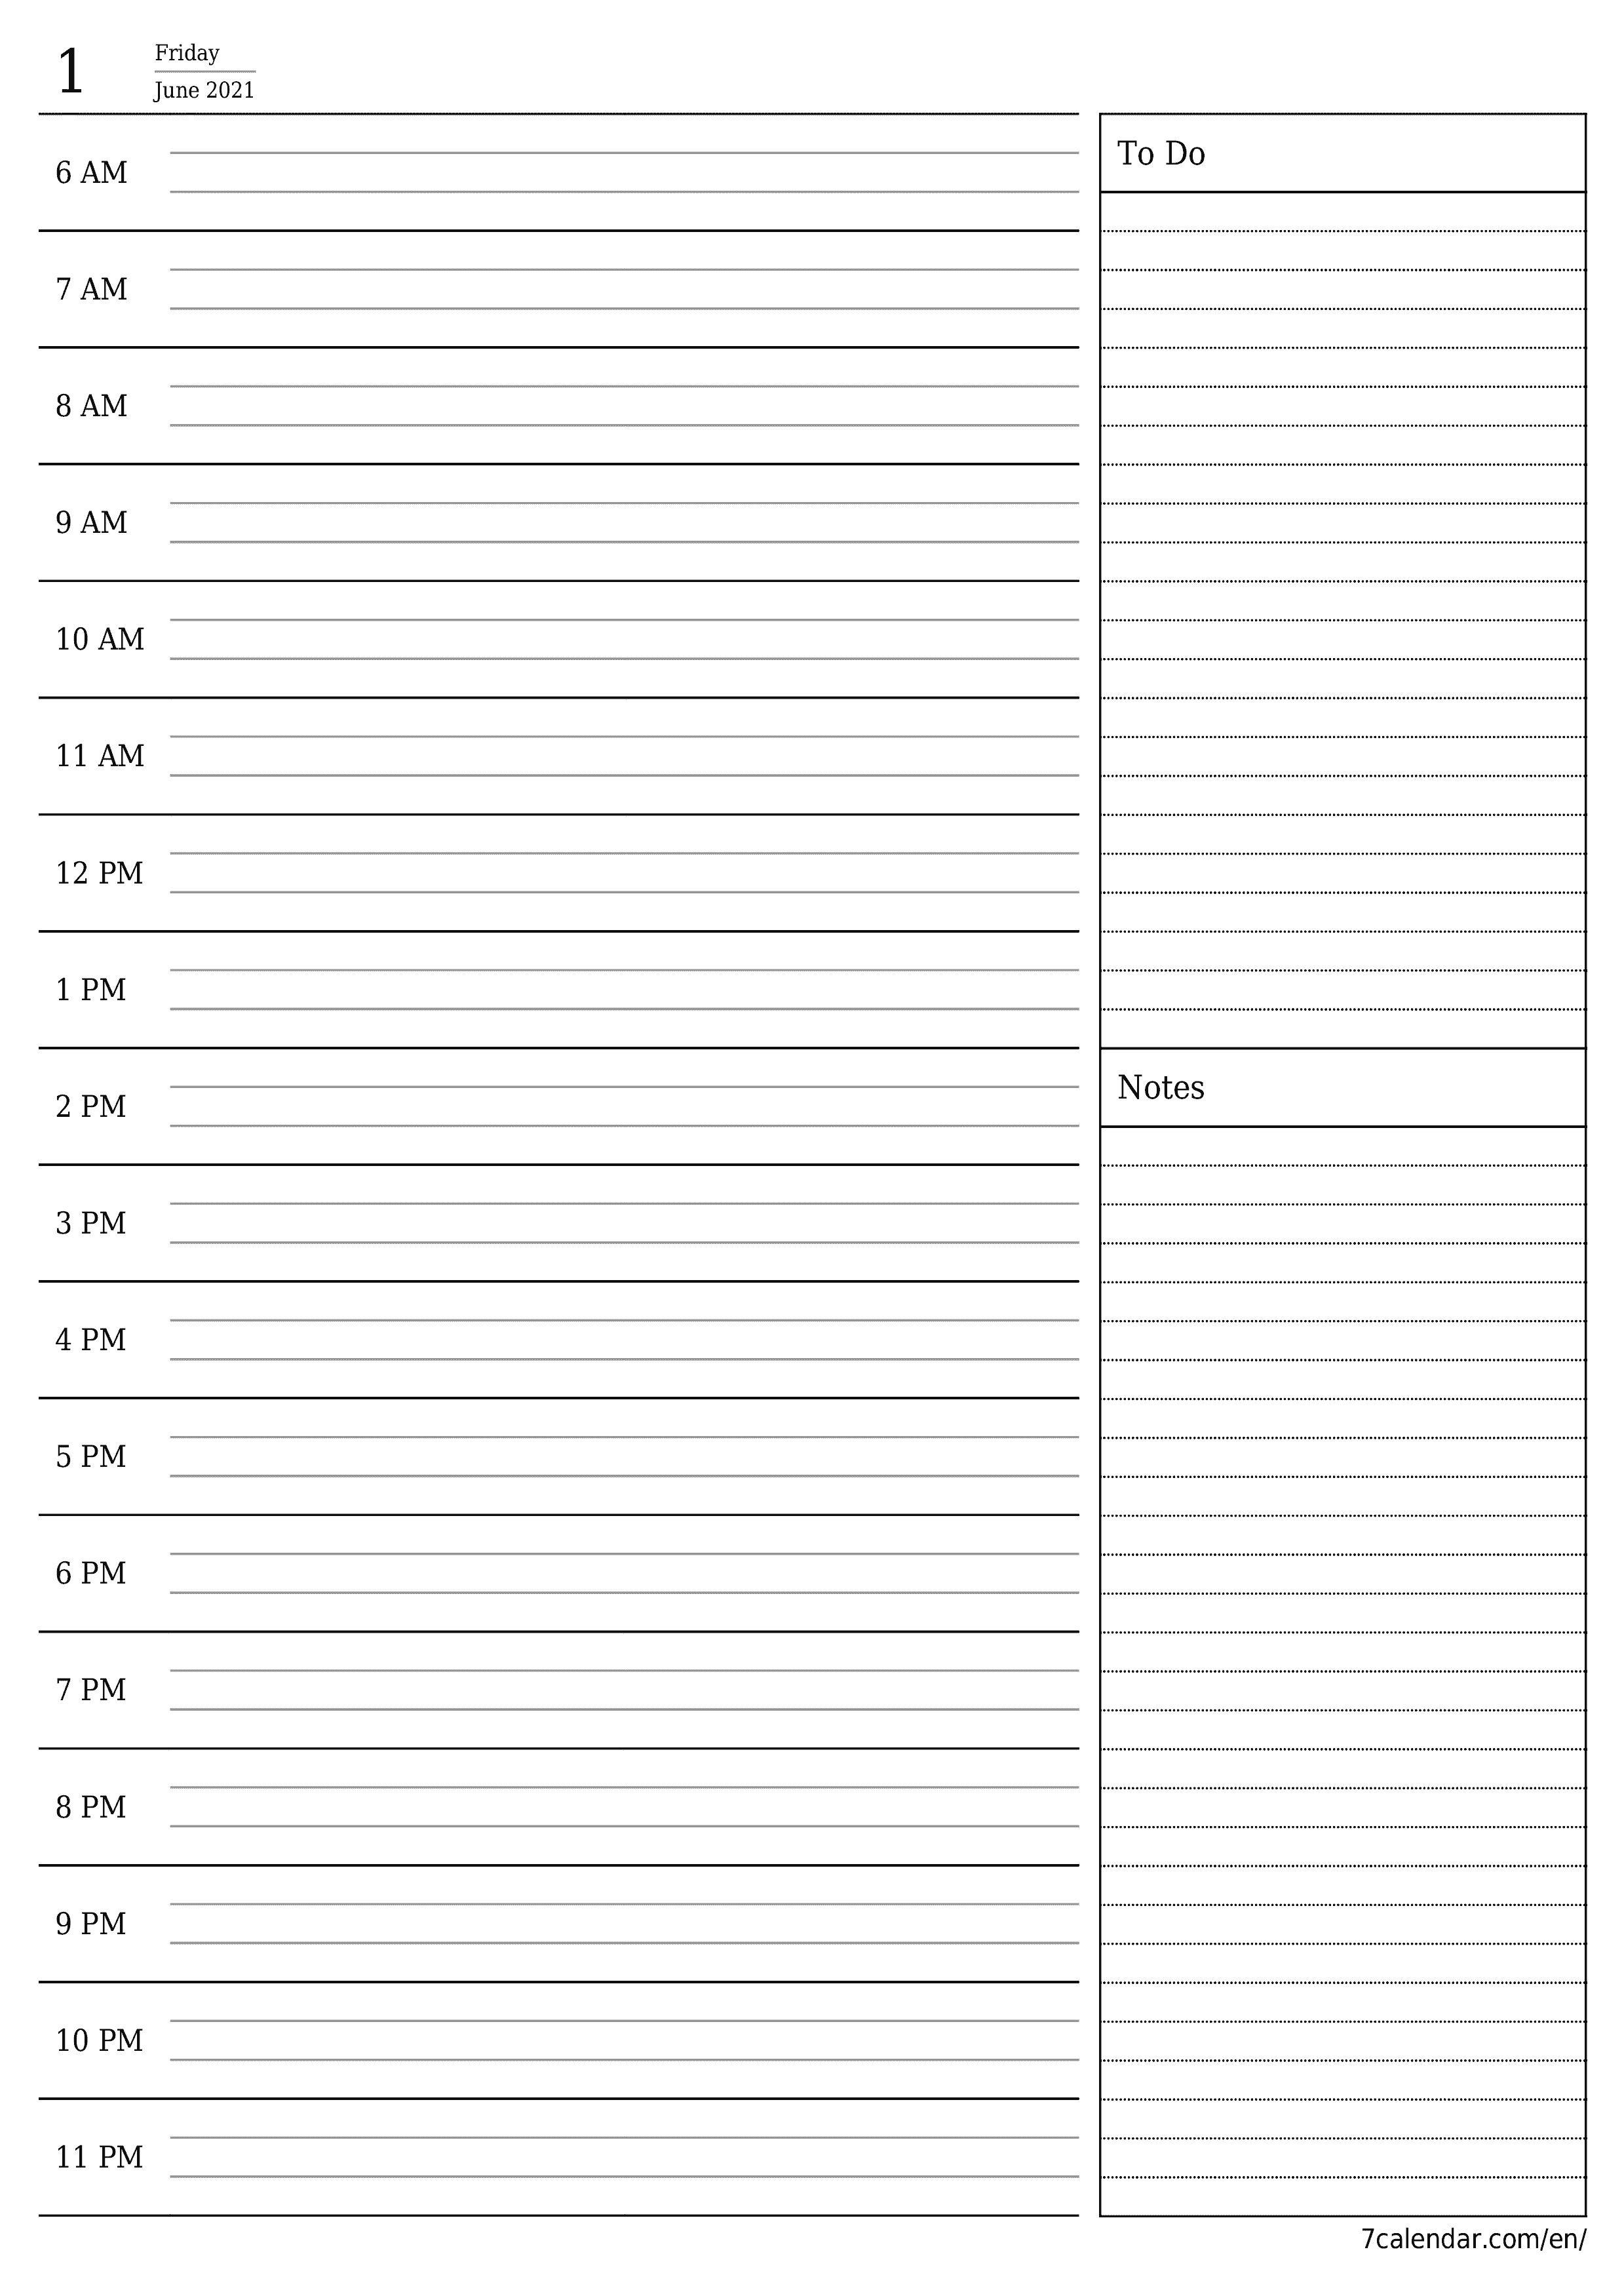 Blank daily printable calendar and planner for day June 2021 with notes, save and print to PDF PNG English